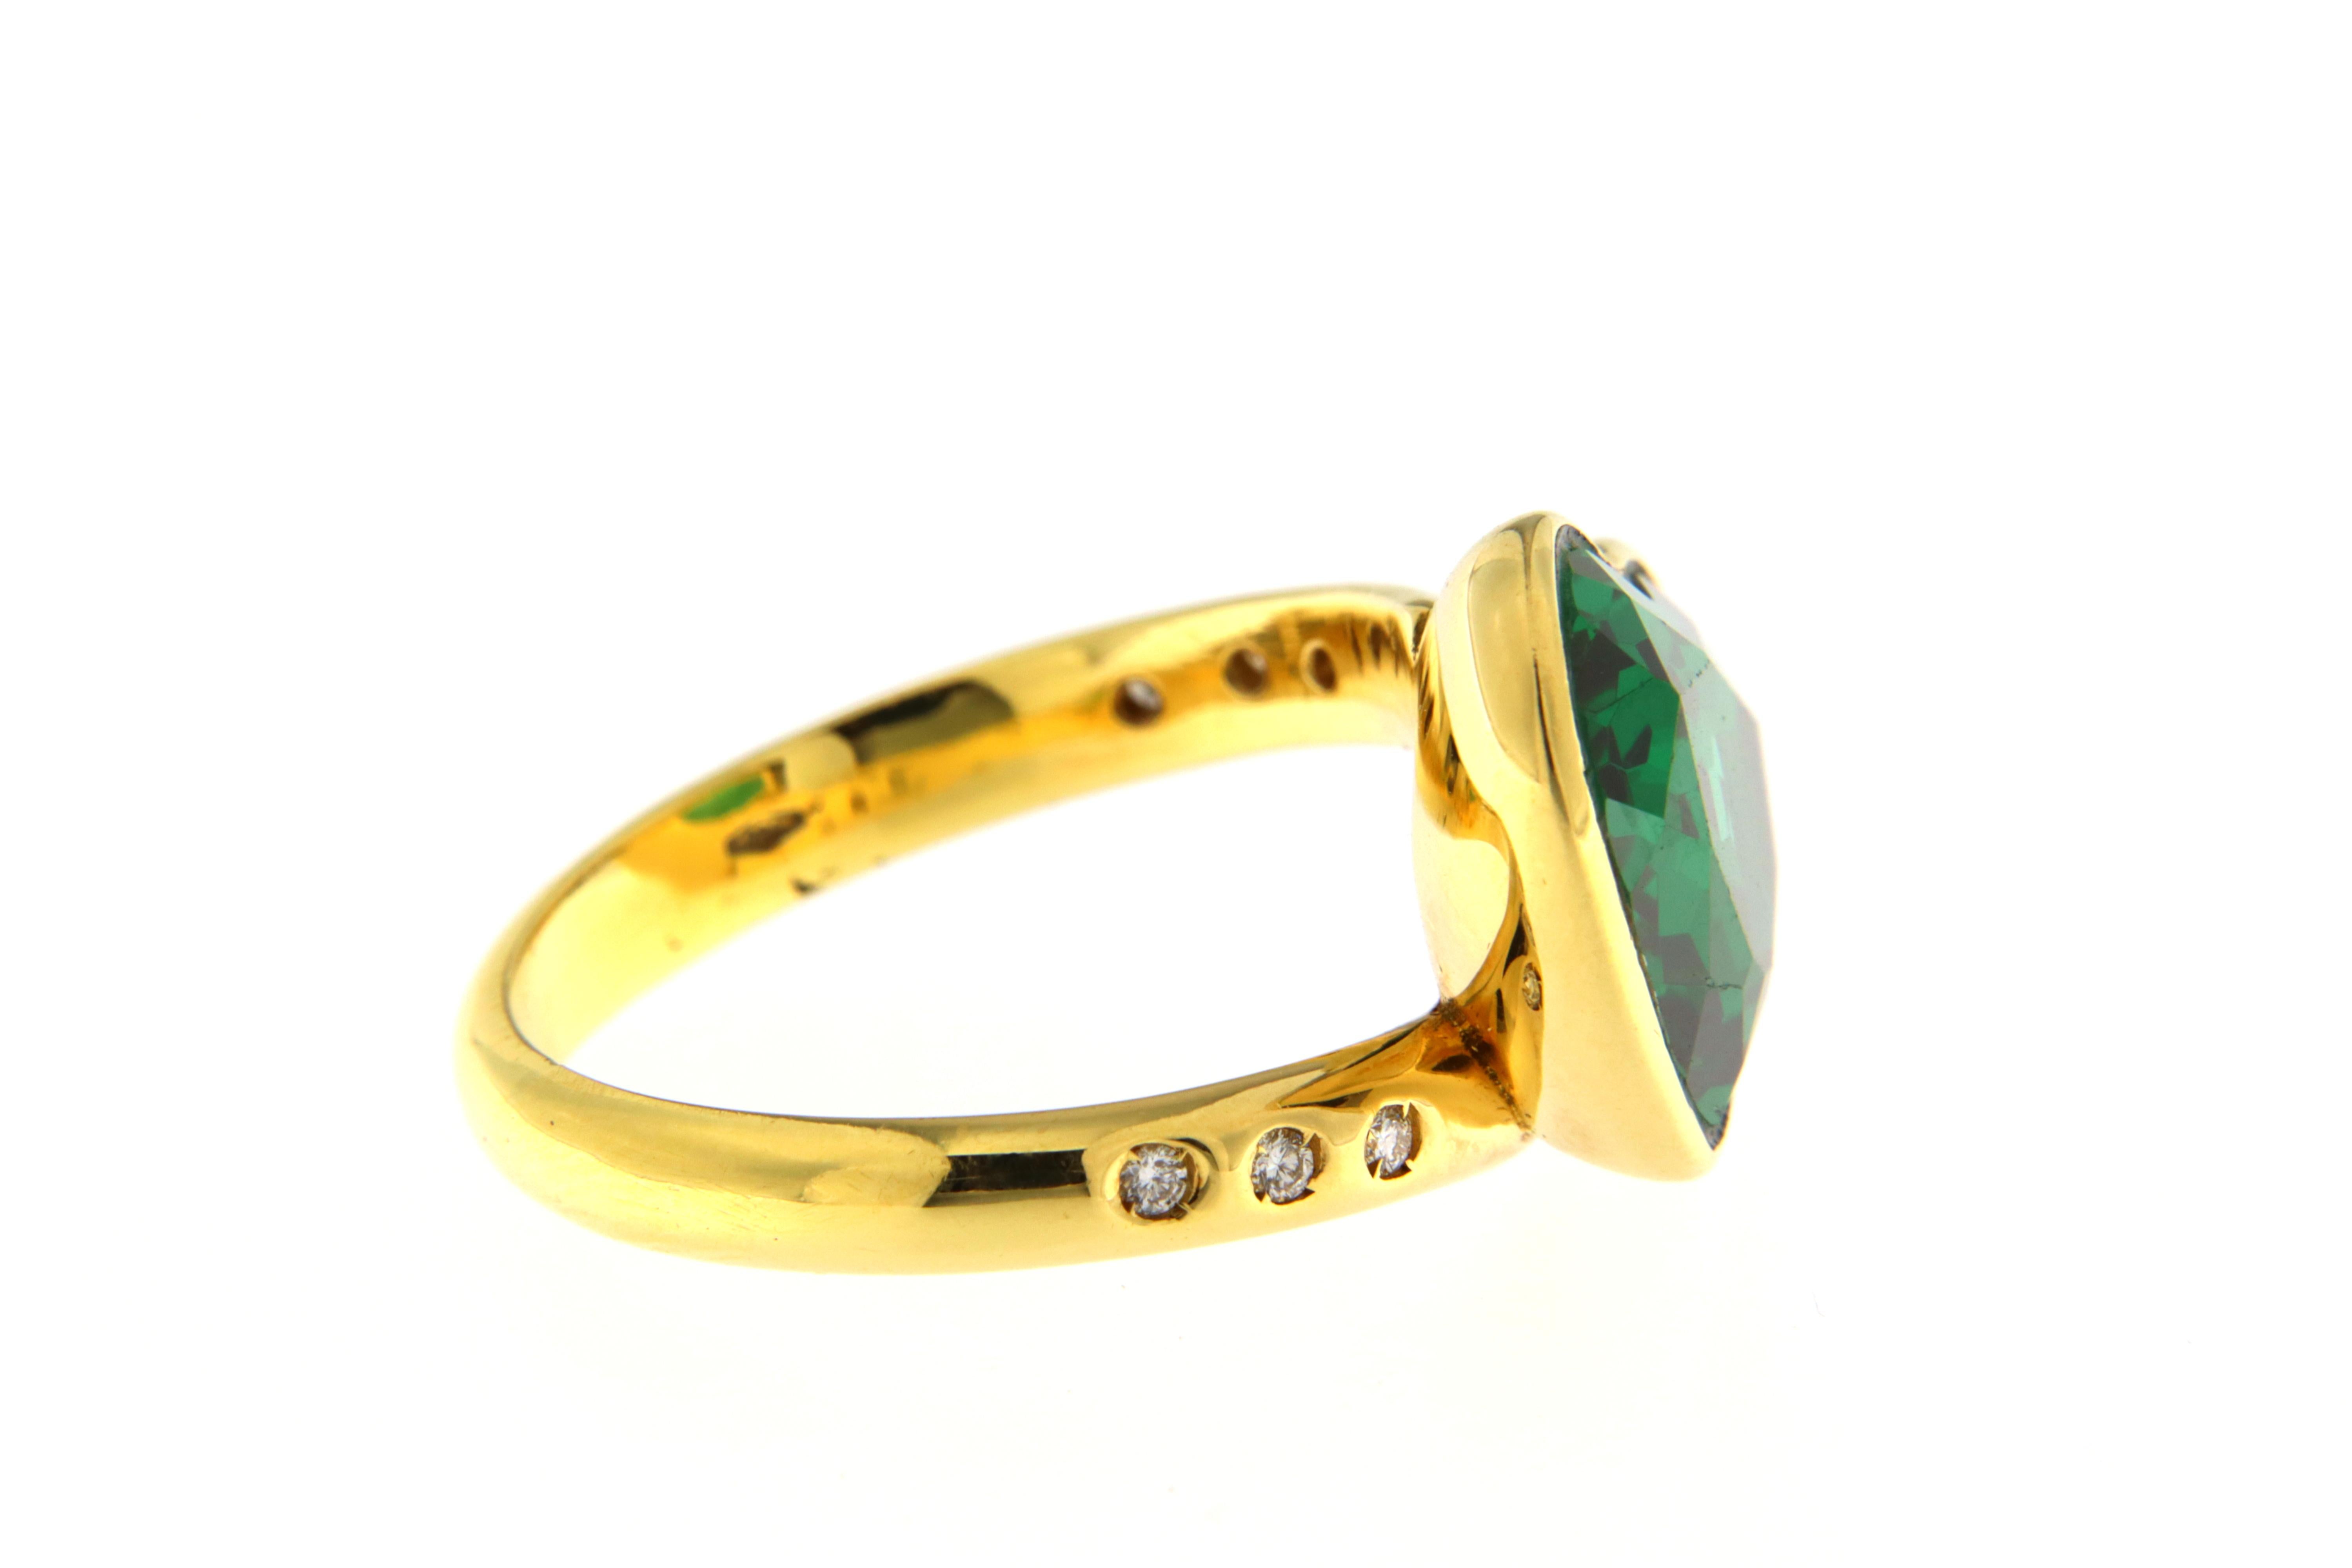 18 Kt Yellow Gold Ring with Diamonds and a Green Tourmaline Heart For Sale 2